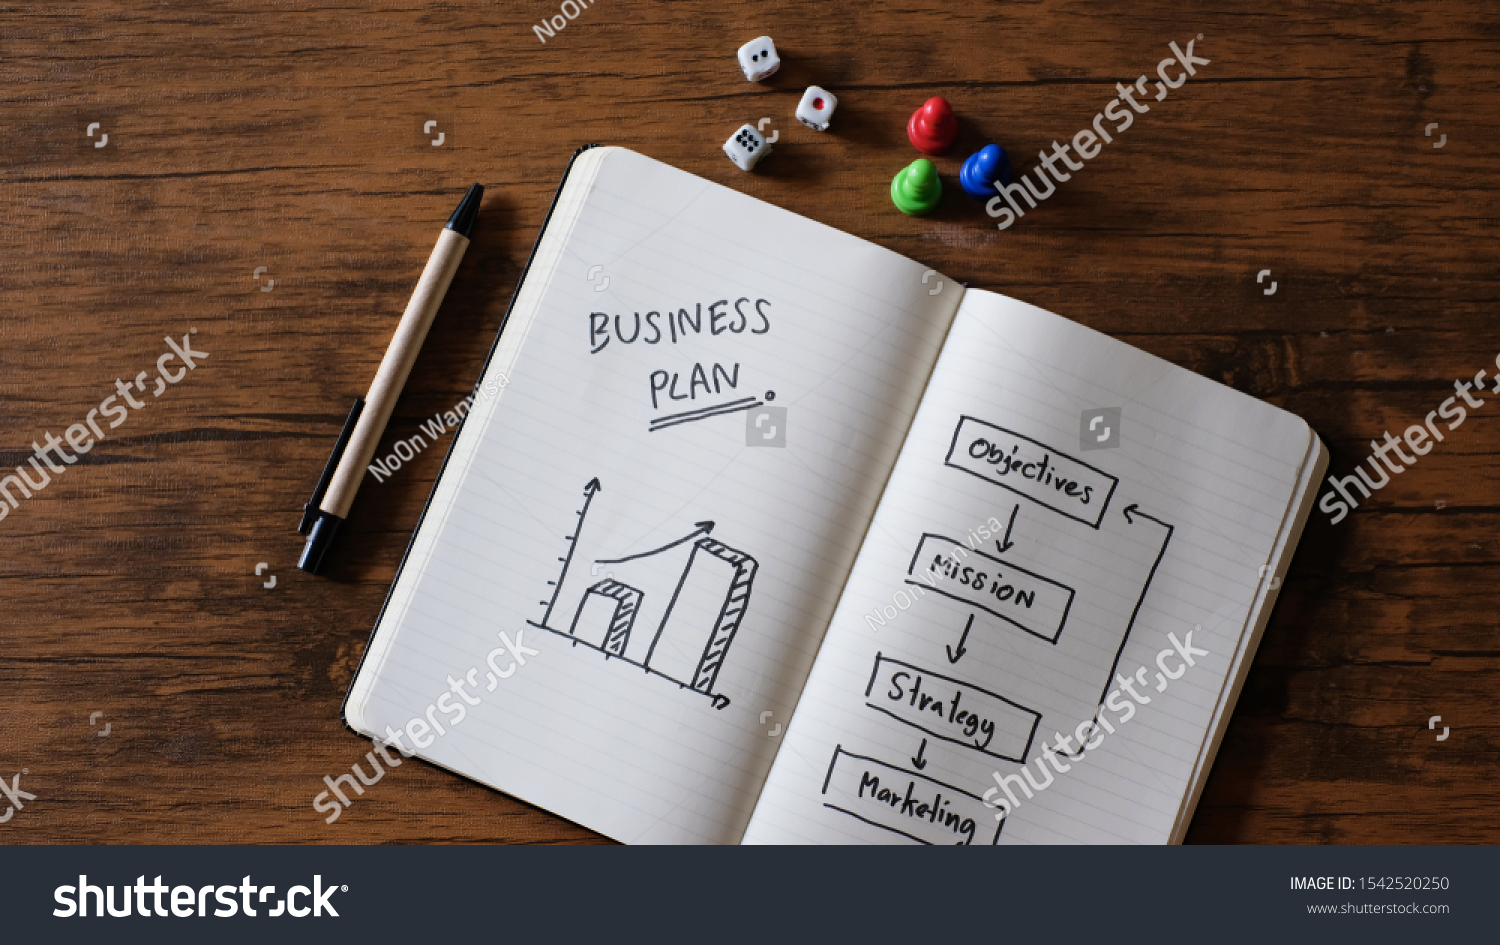 Business Plan with a strategy plan to be successful. #1542520250